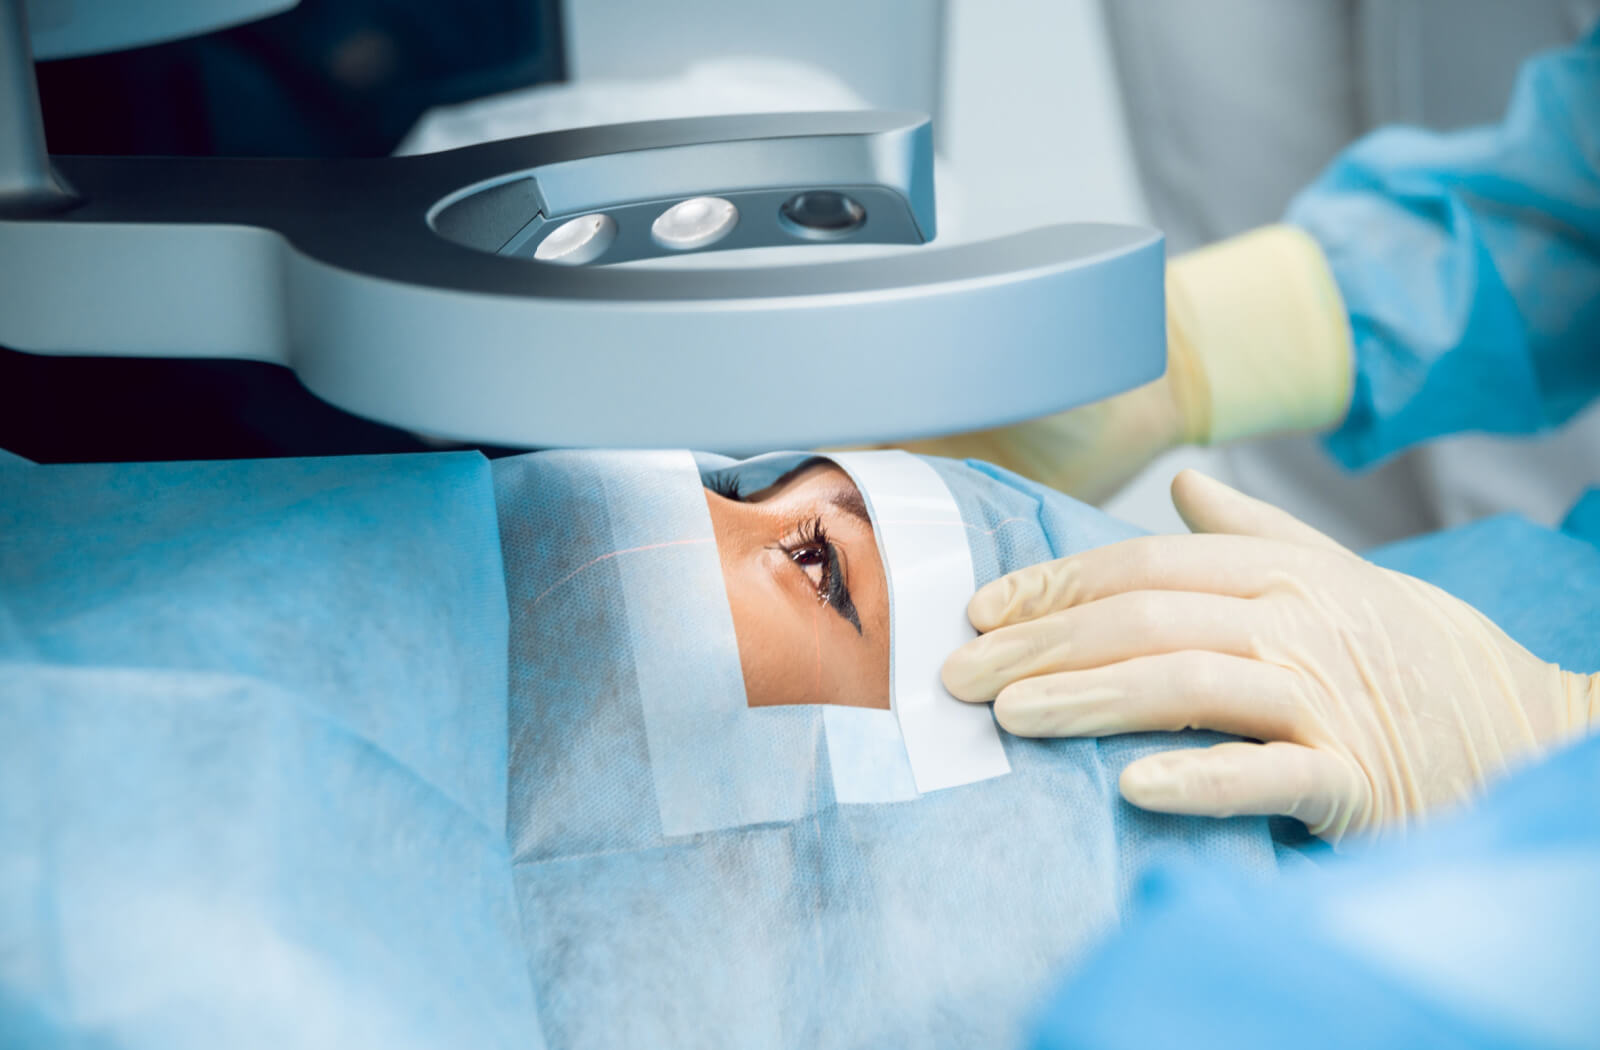 A close-up of a person undergoing laser surgery for her eyes.